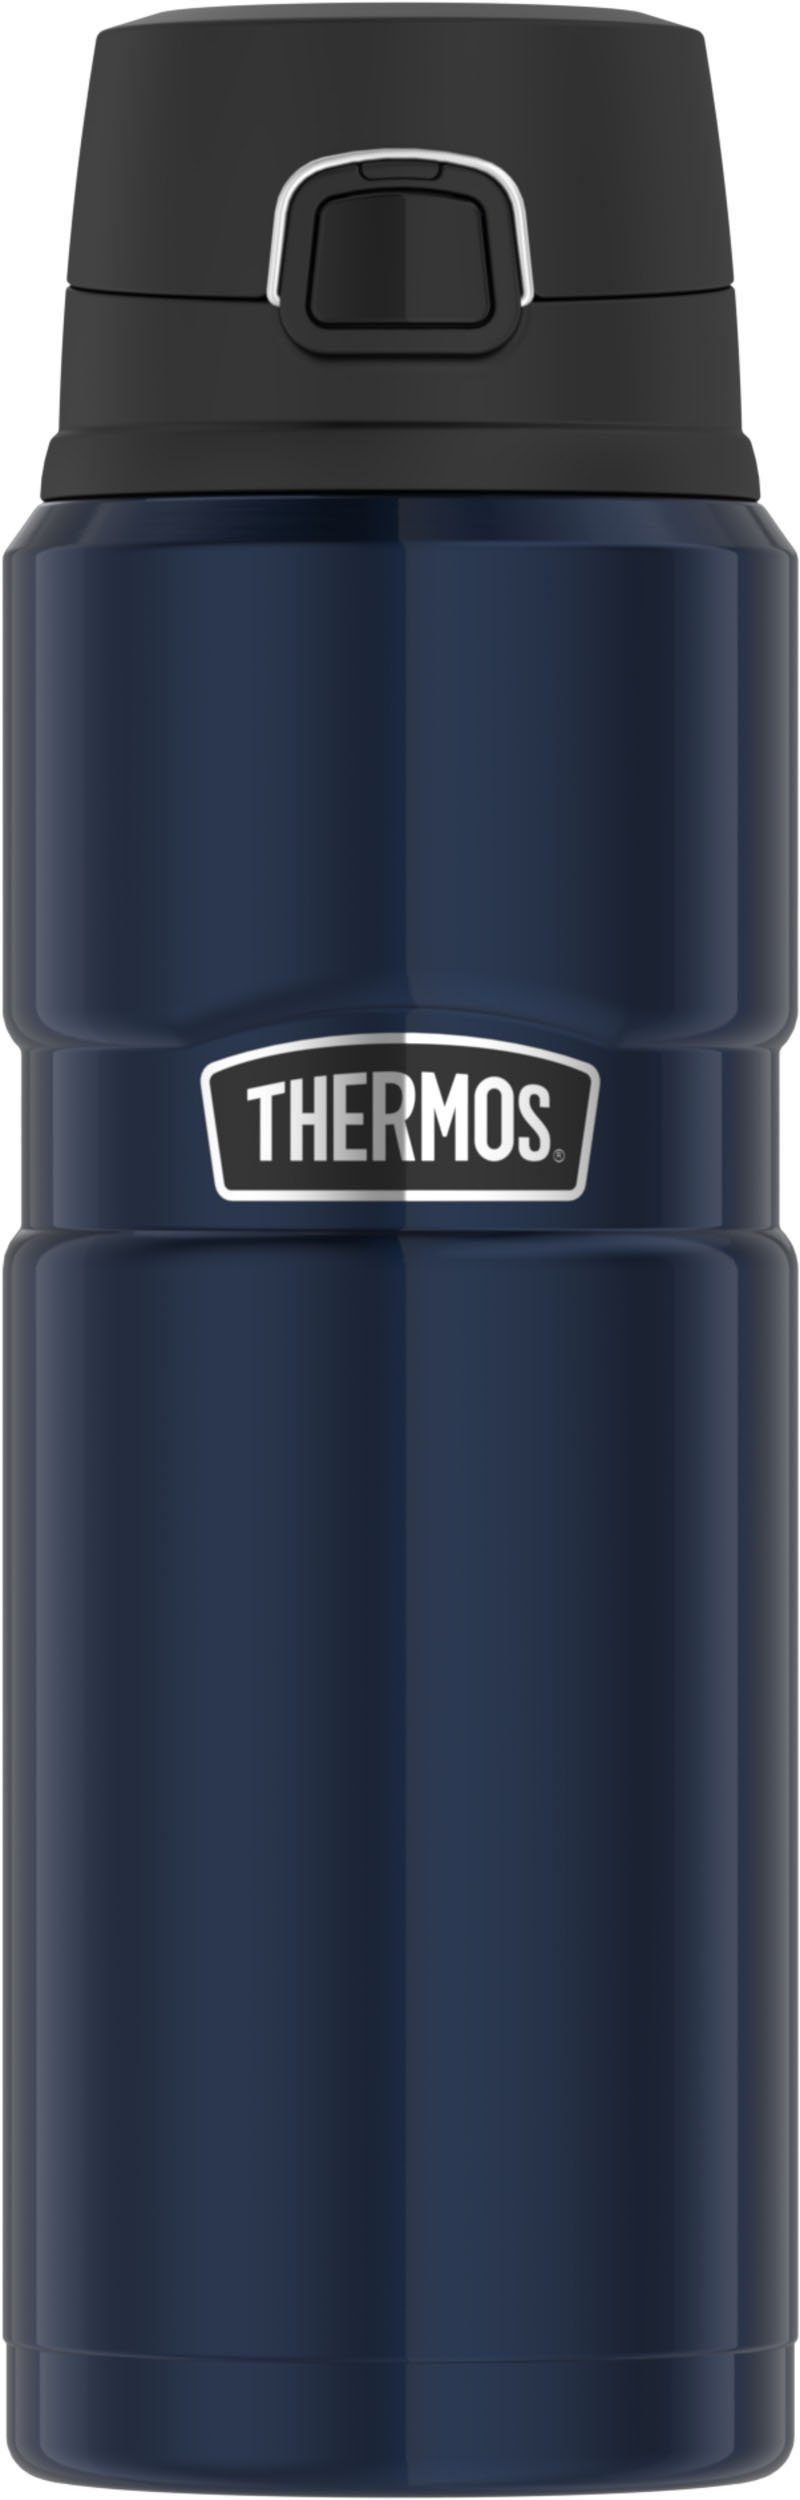 THERMOS Thermoflasche Stainless King, Edelstahl, 0,7 Liter blau